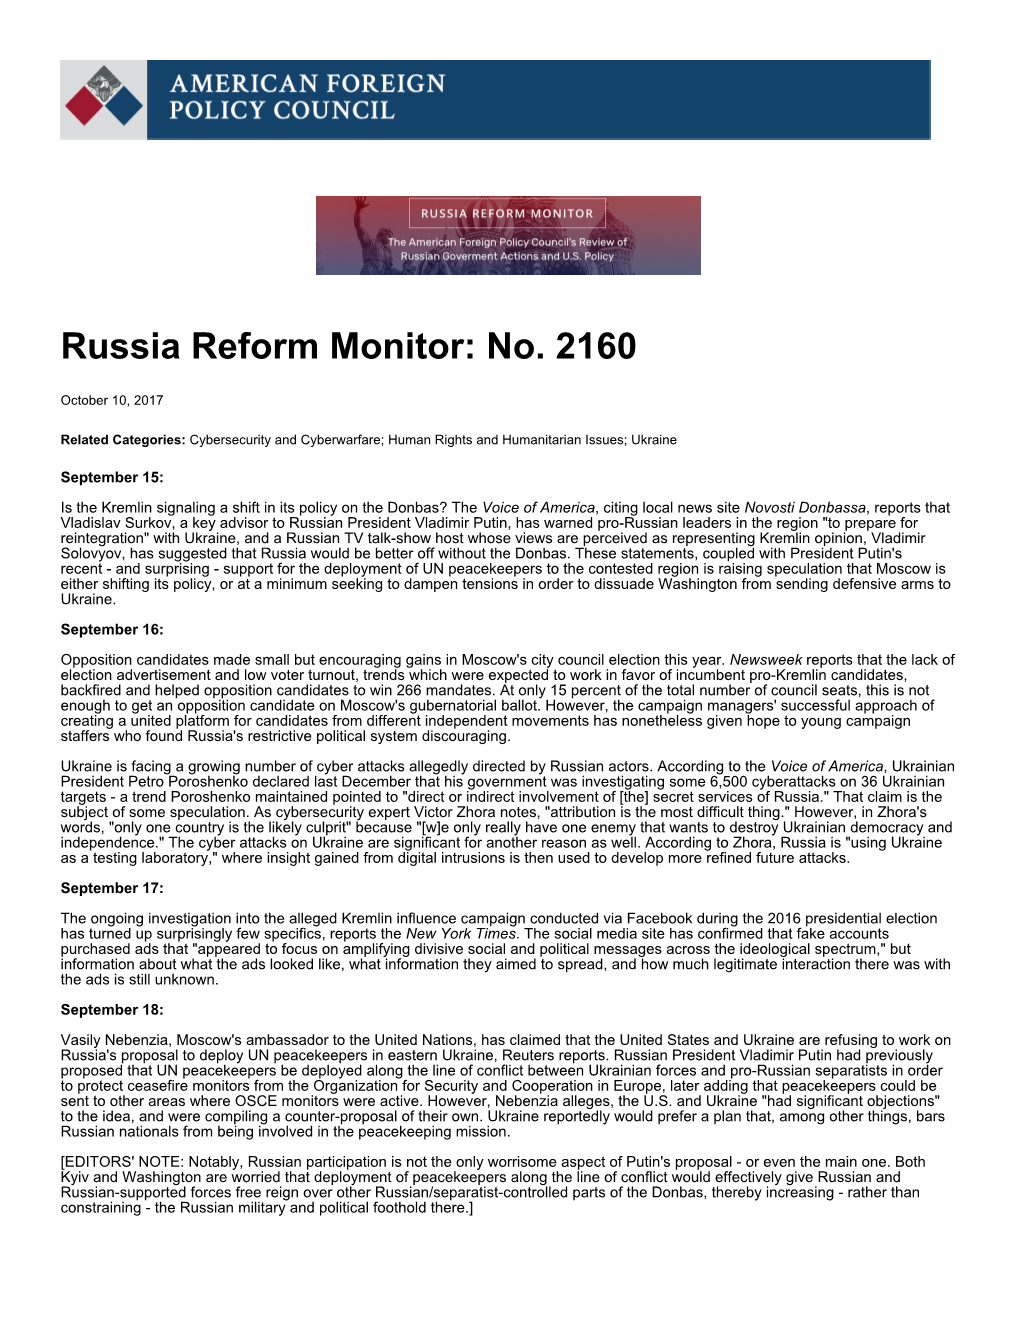 Russia Reform Monitor: No. 2160 | American Foreign Policy Council